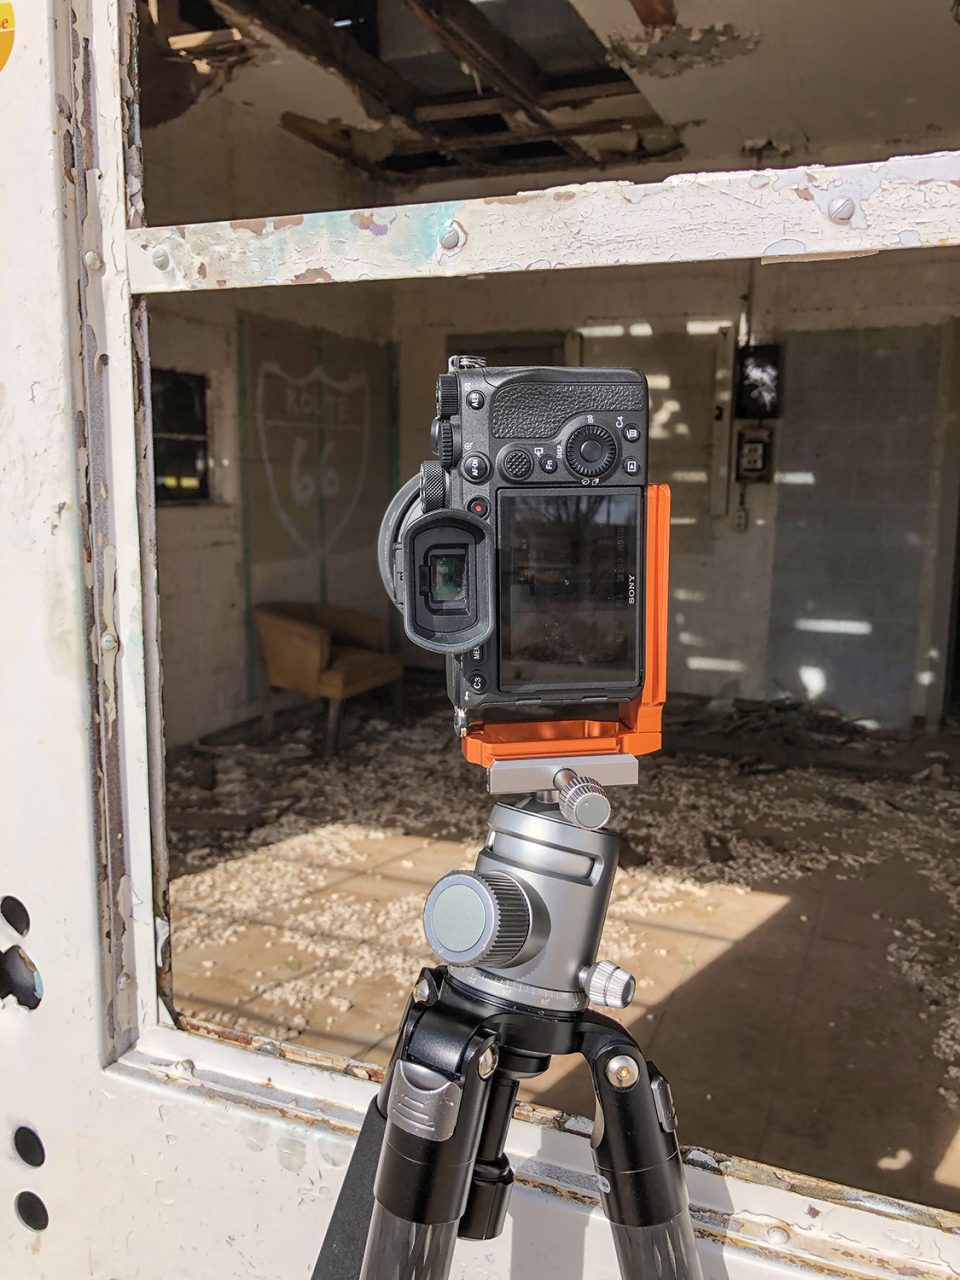 Behind-the-scenes image of my camera shooting a chair inside the abandoned Texas Longhorn Motel building on Route 66 in Glenrio, Texas.